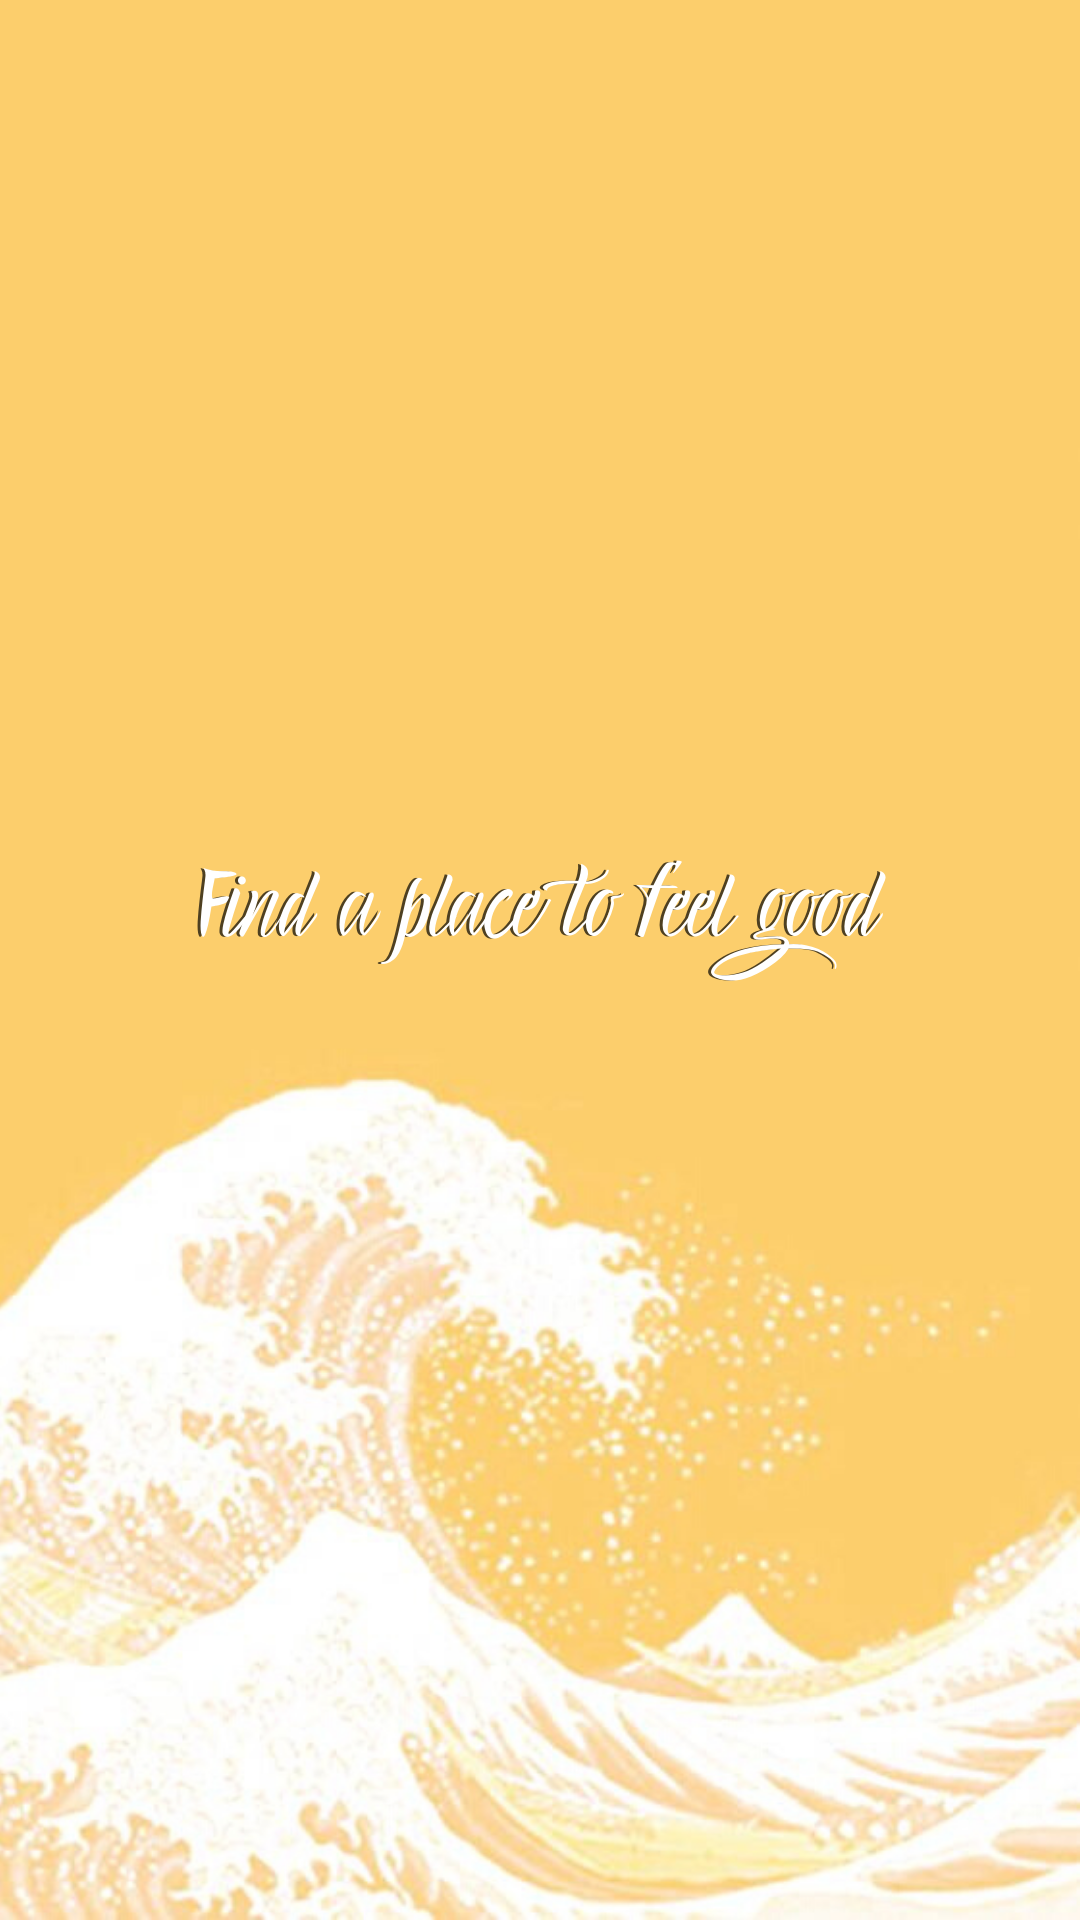 Treat People With Kindness Harry Styles Lyric Phone Wallpaper